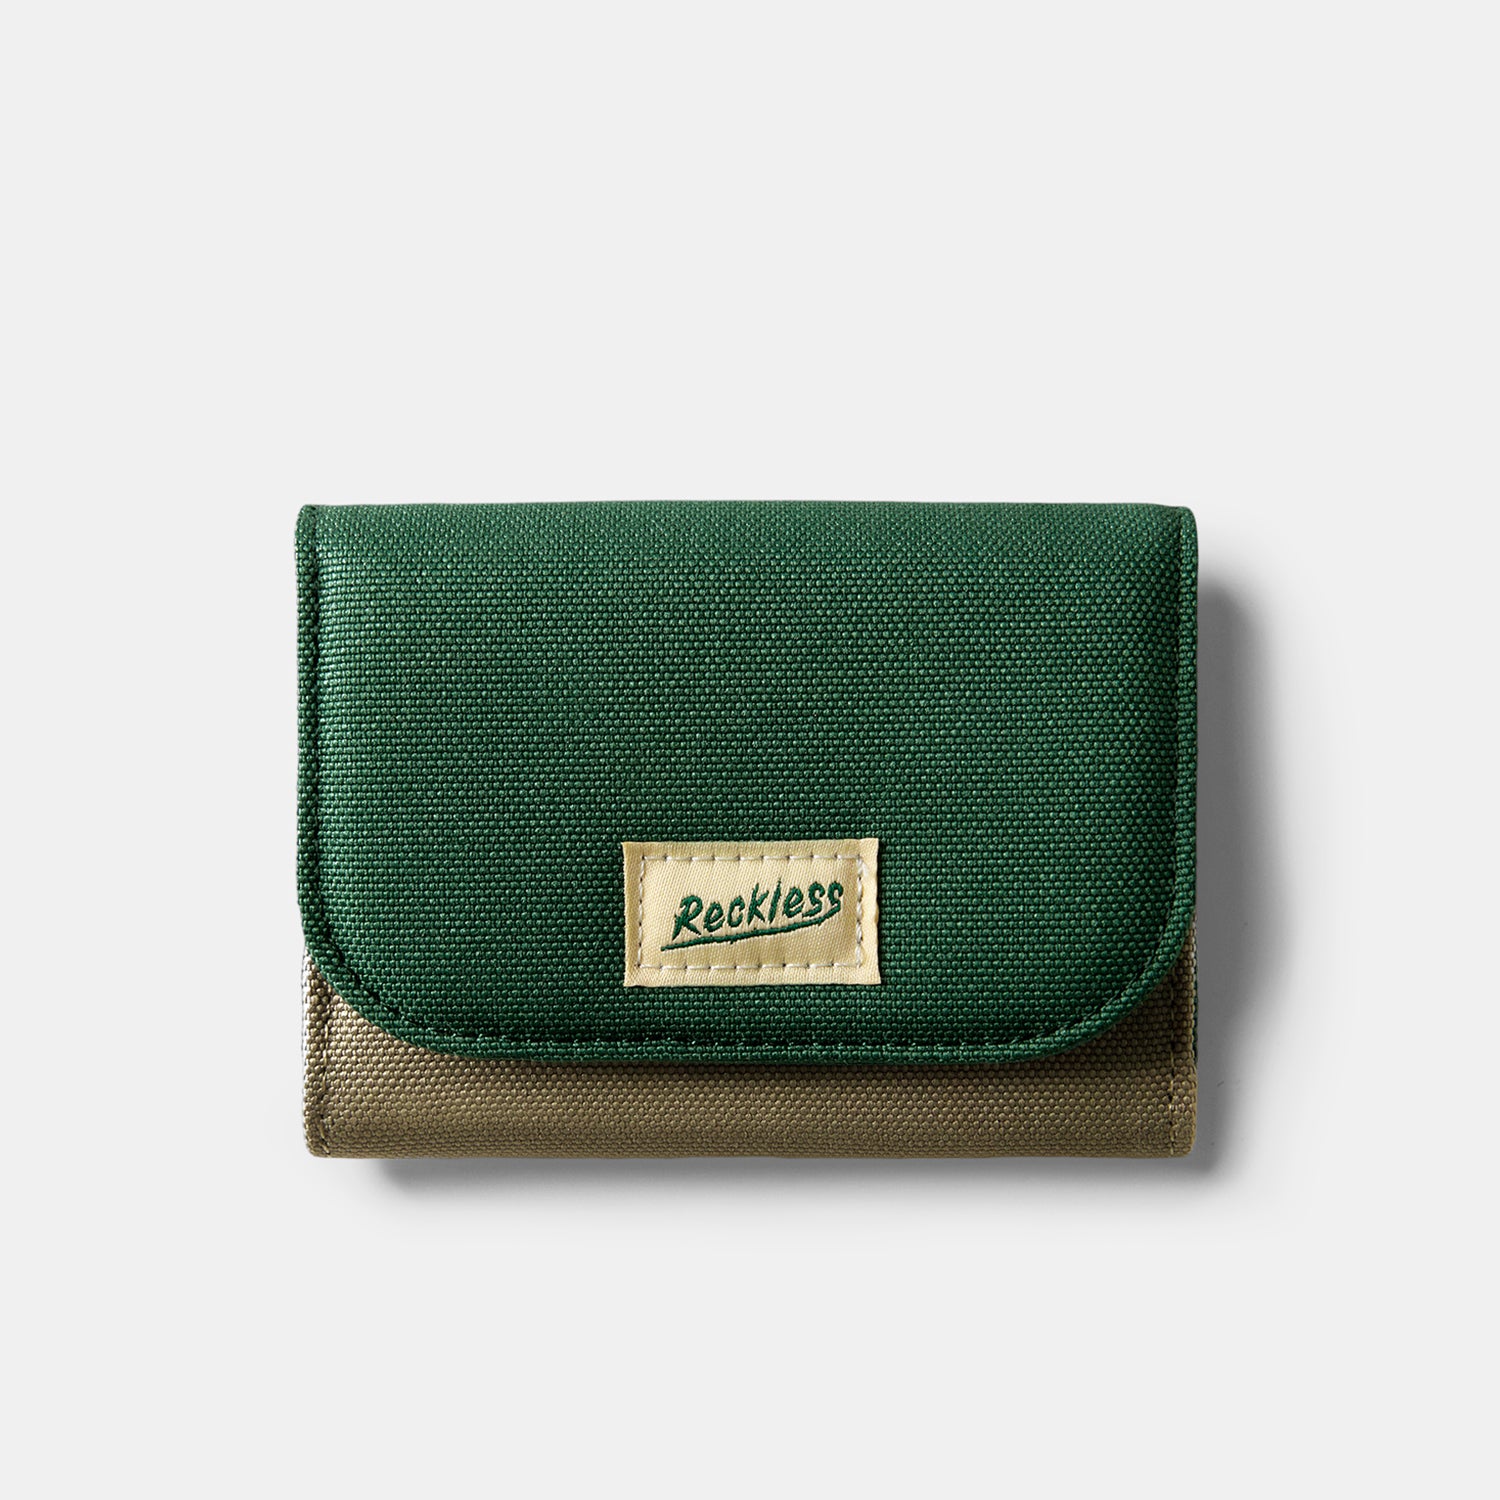 Ví Claire Wallet